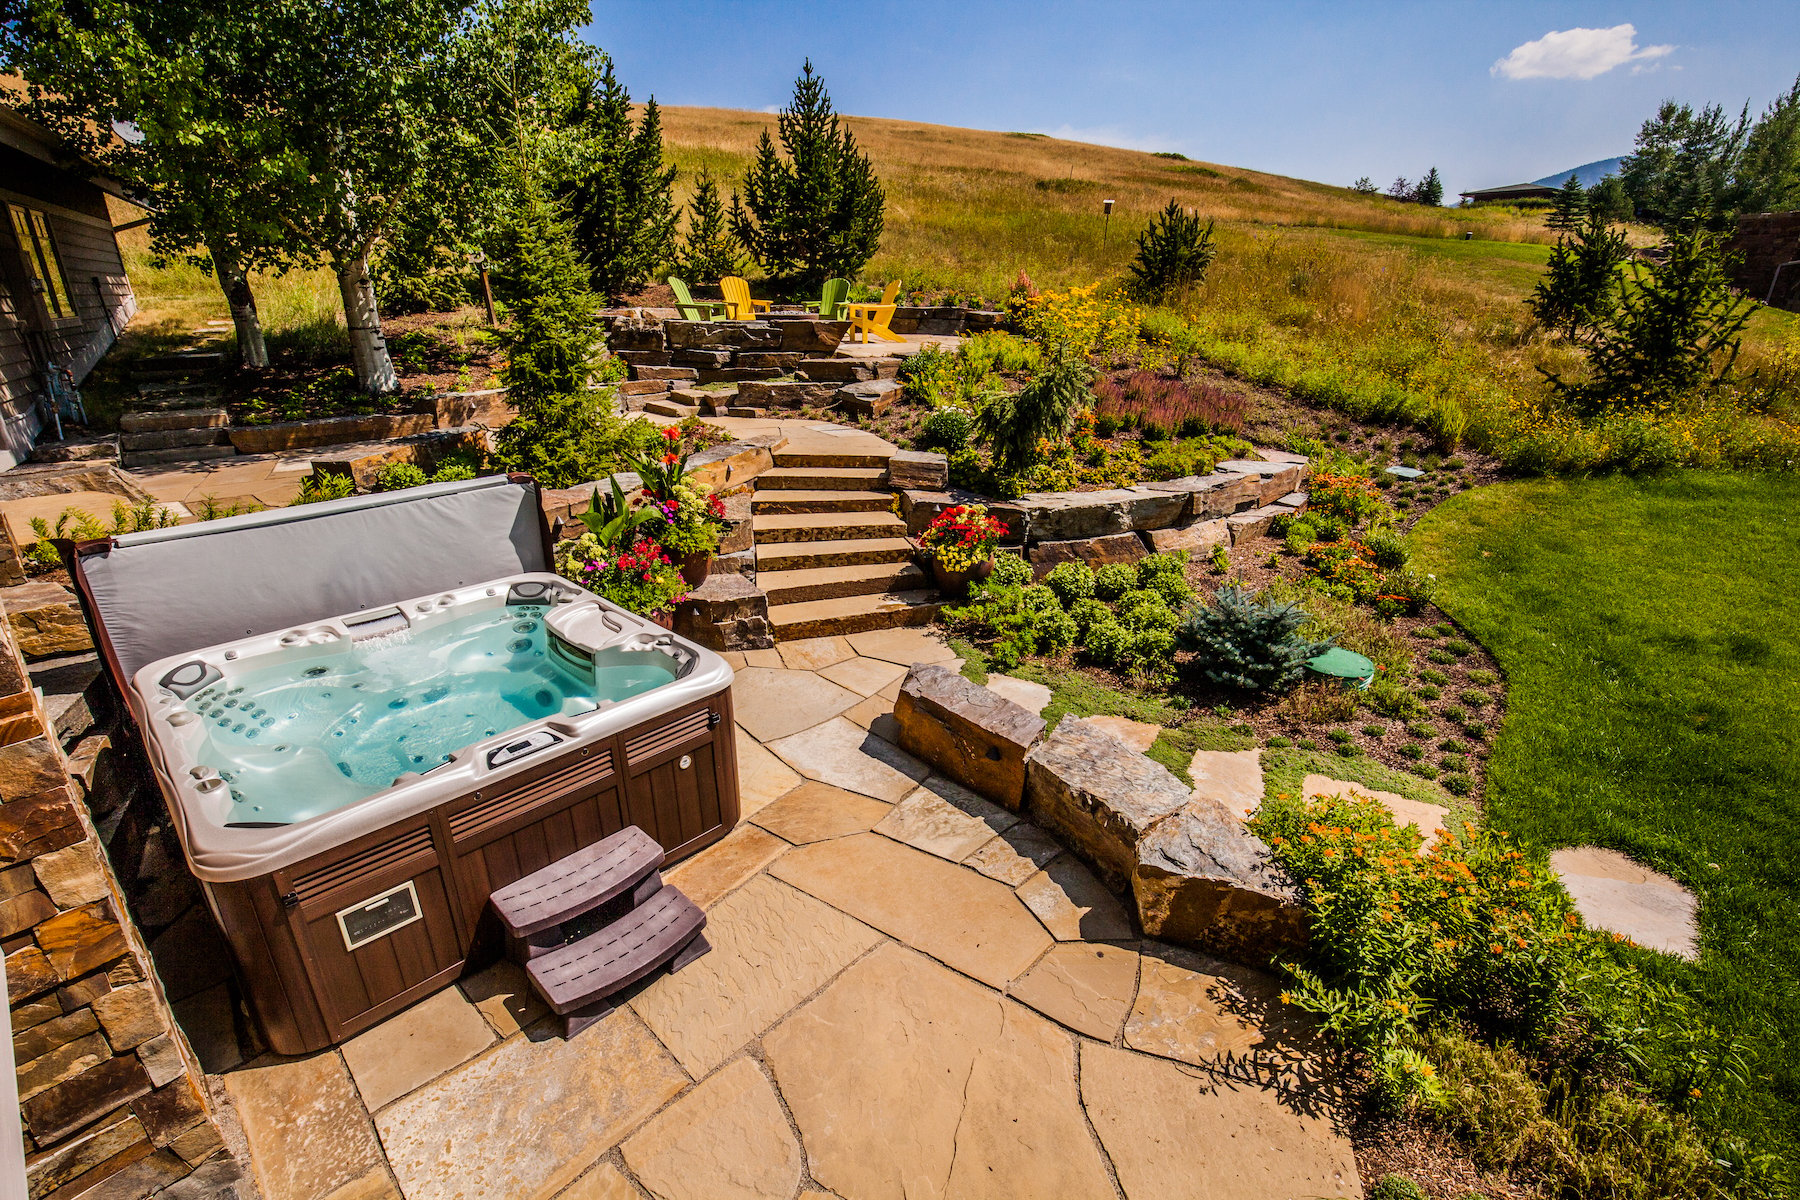 Hot Tub landscaping and layout